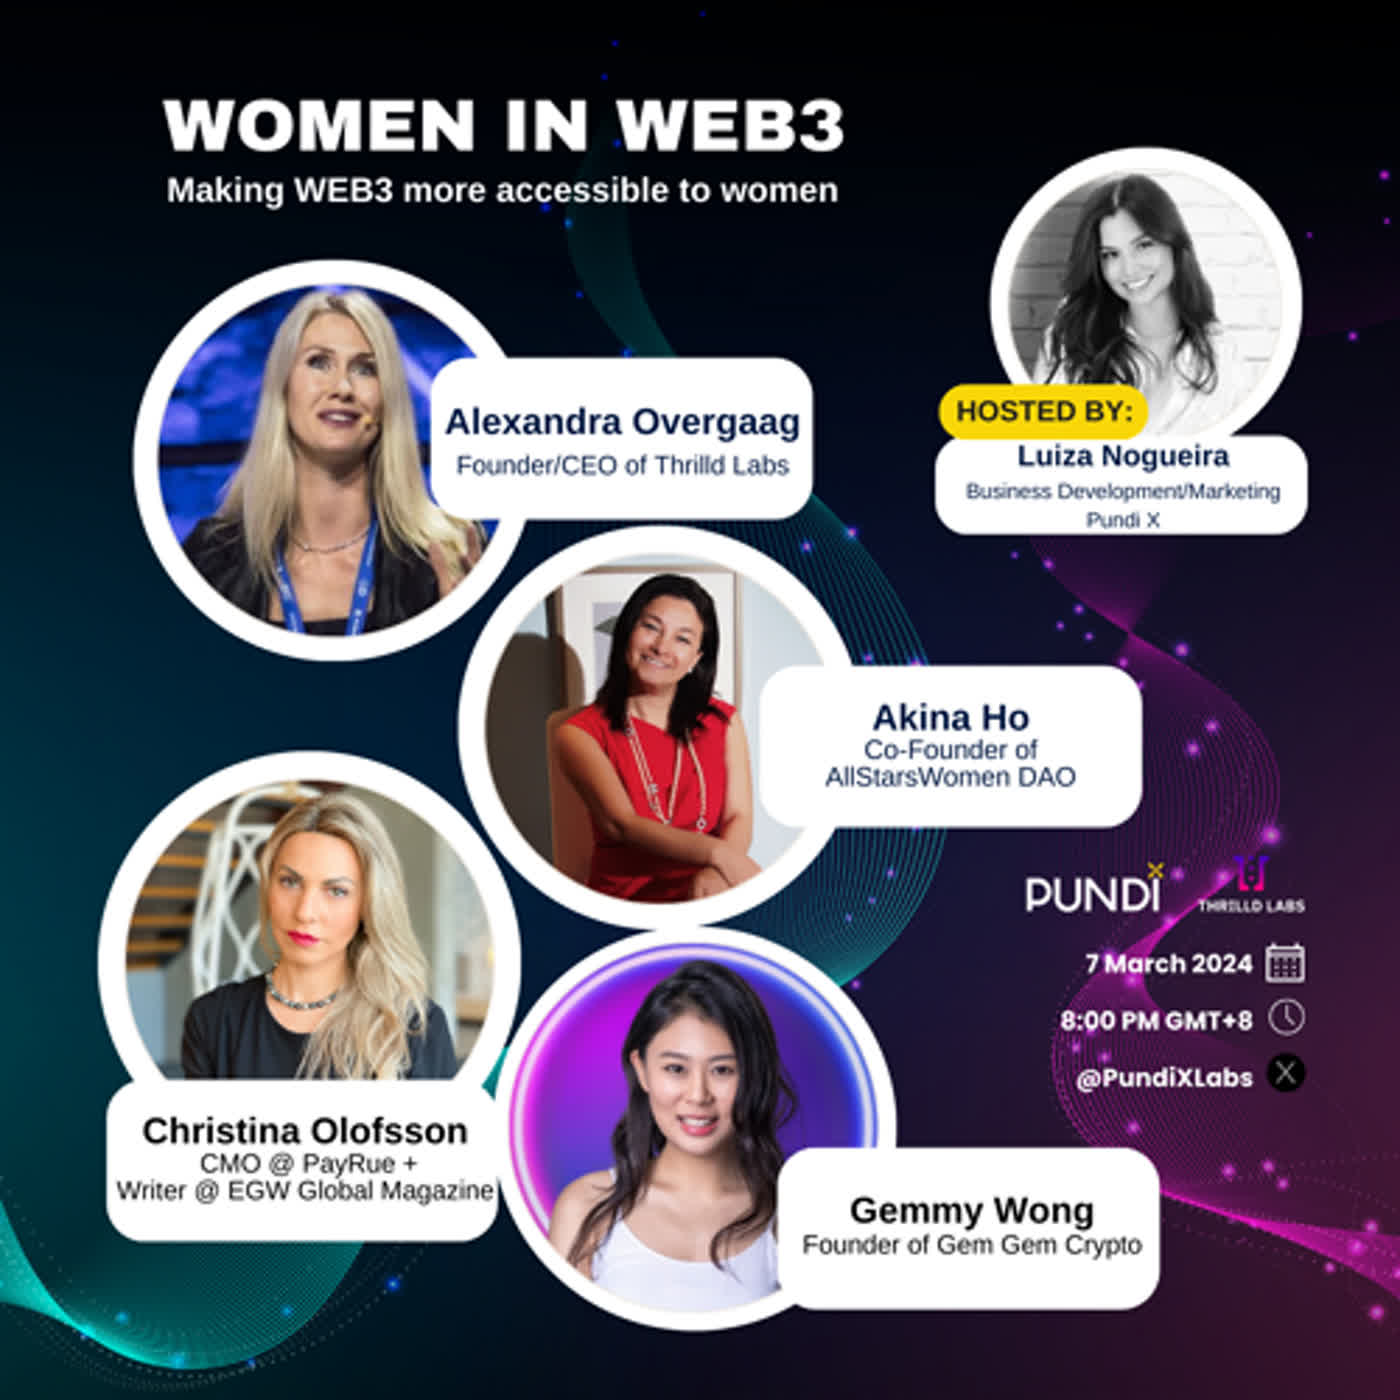 S4E3 - Women in Web3 - Making WEB3 more accessible to women